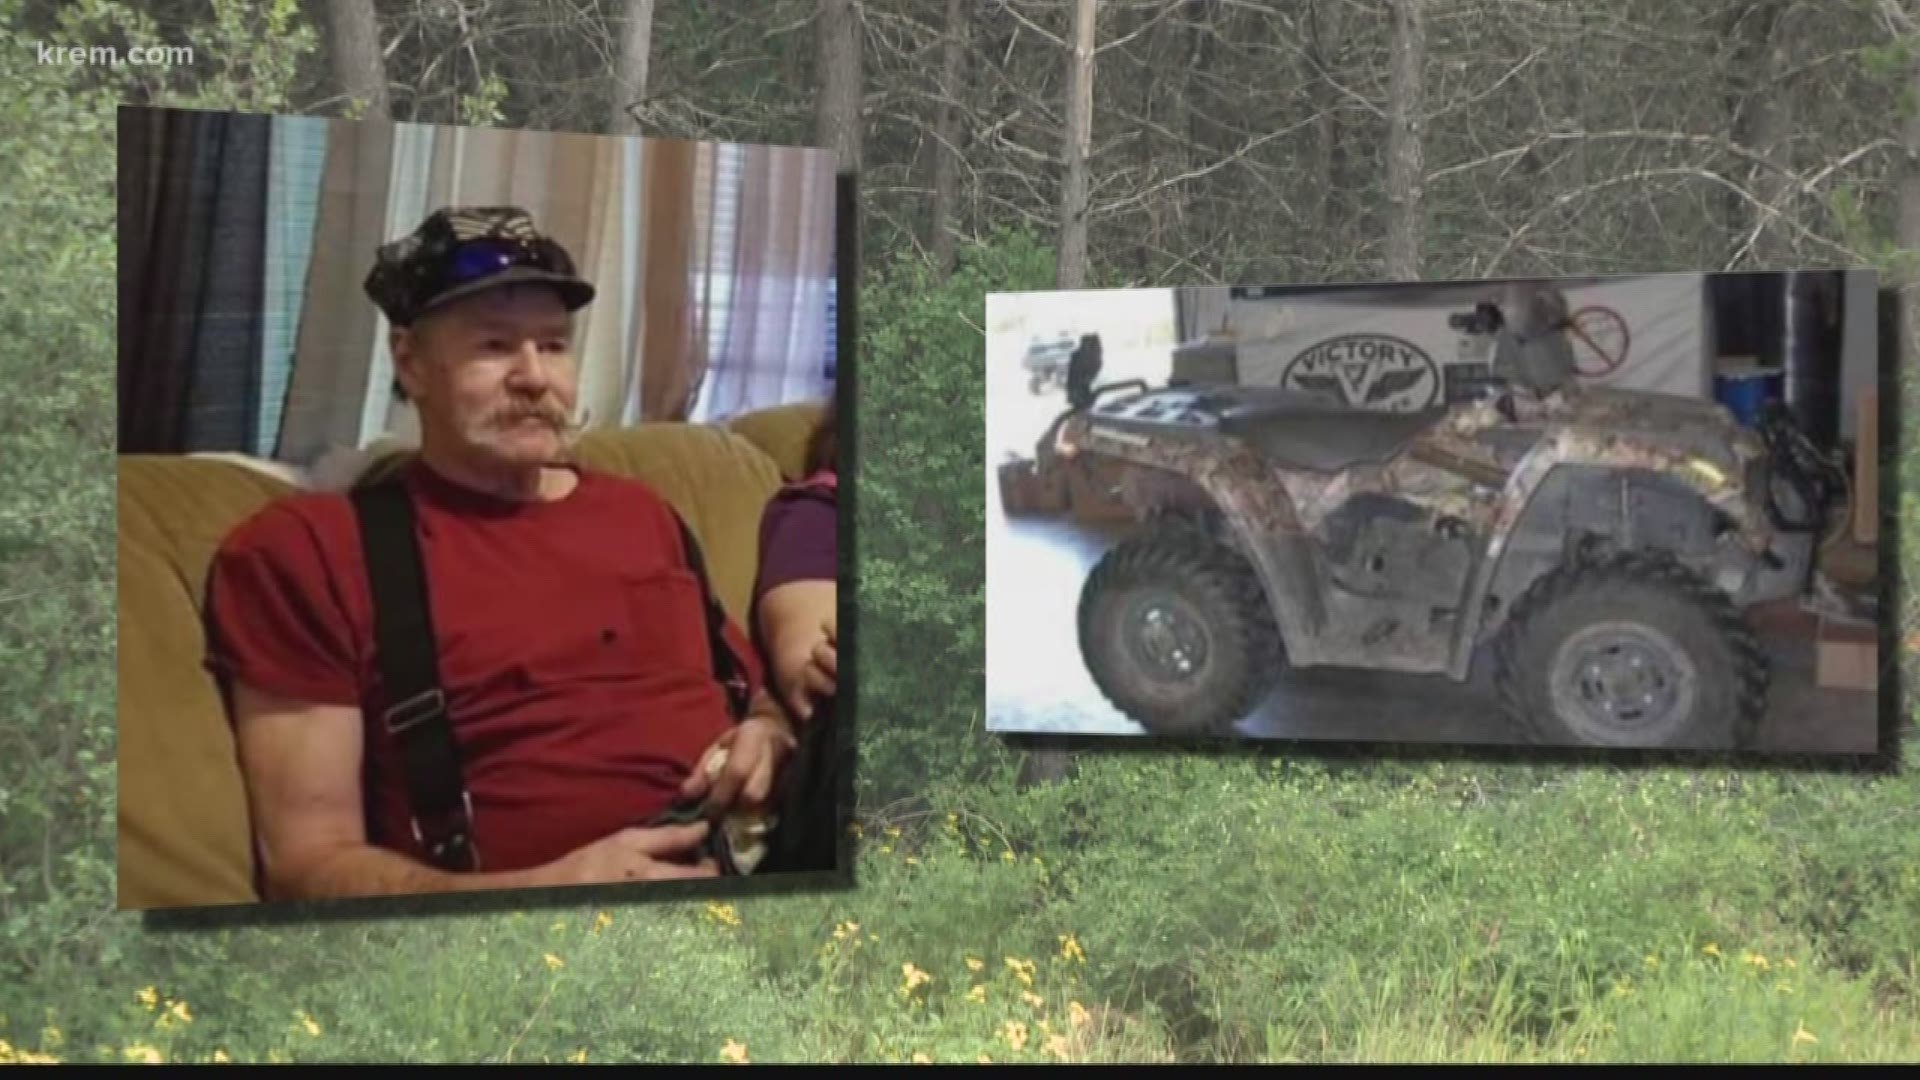 KREM's Taylor Viydo spoke with Paul Coates, who found his brother Butch Coates three days after Butch crashed his ATV about 300 yards from his house.